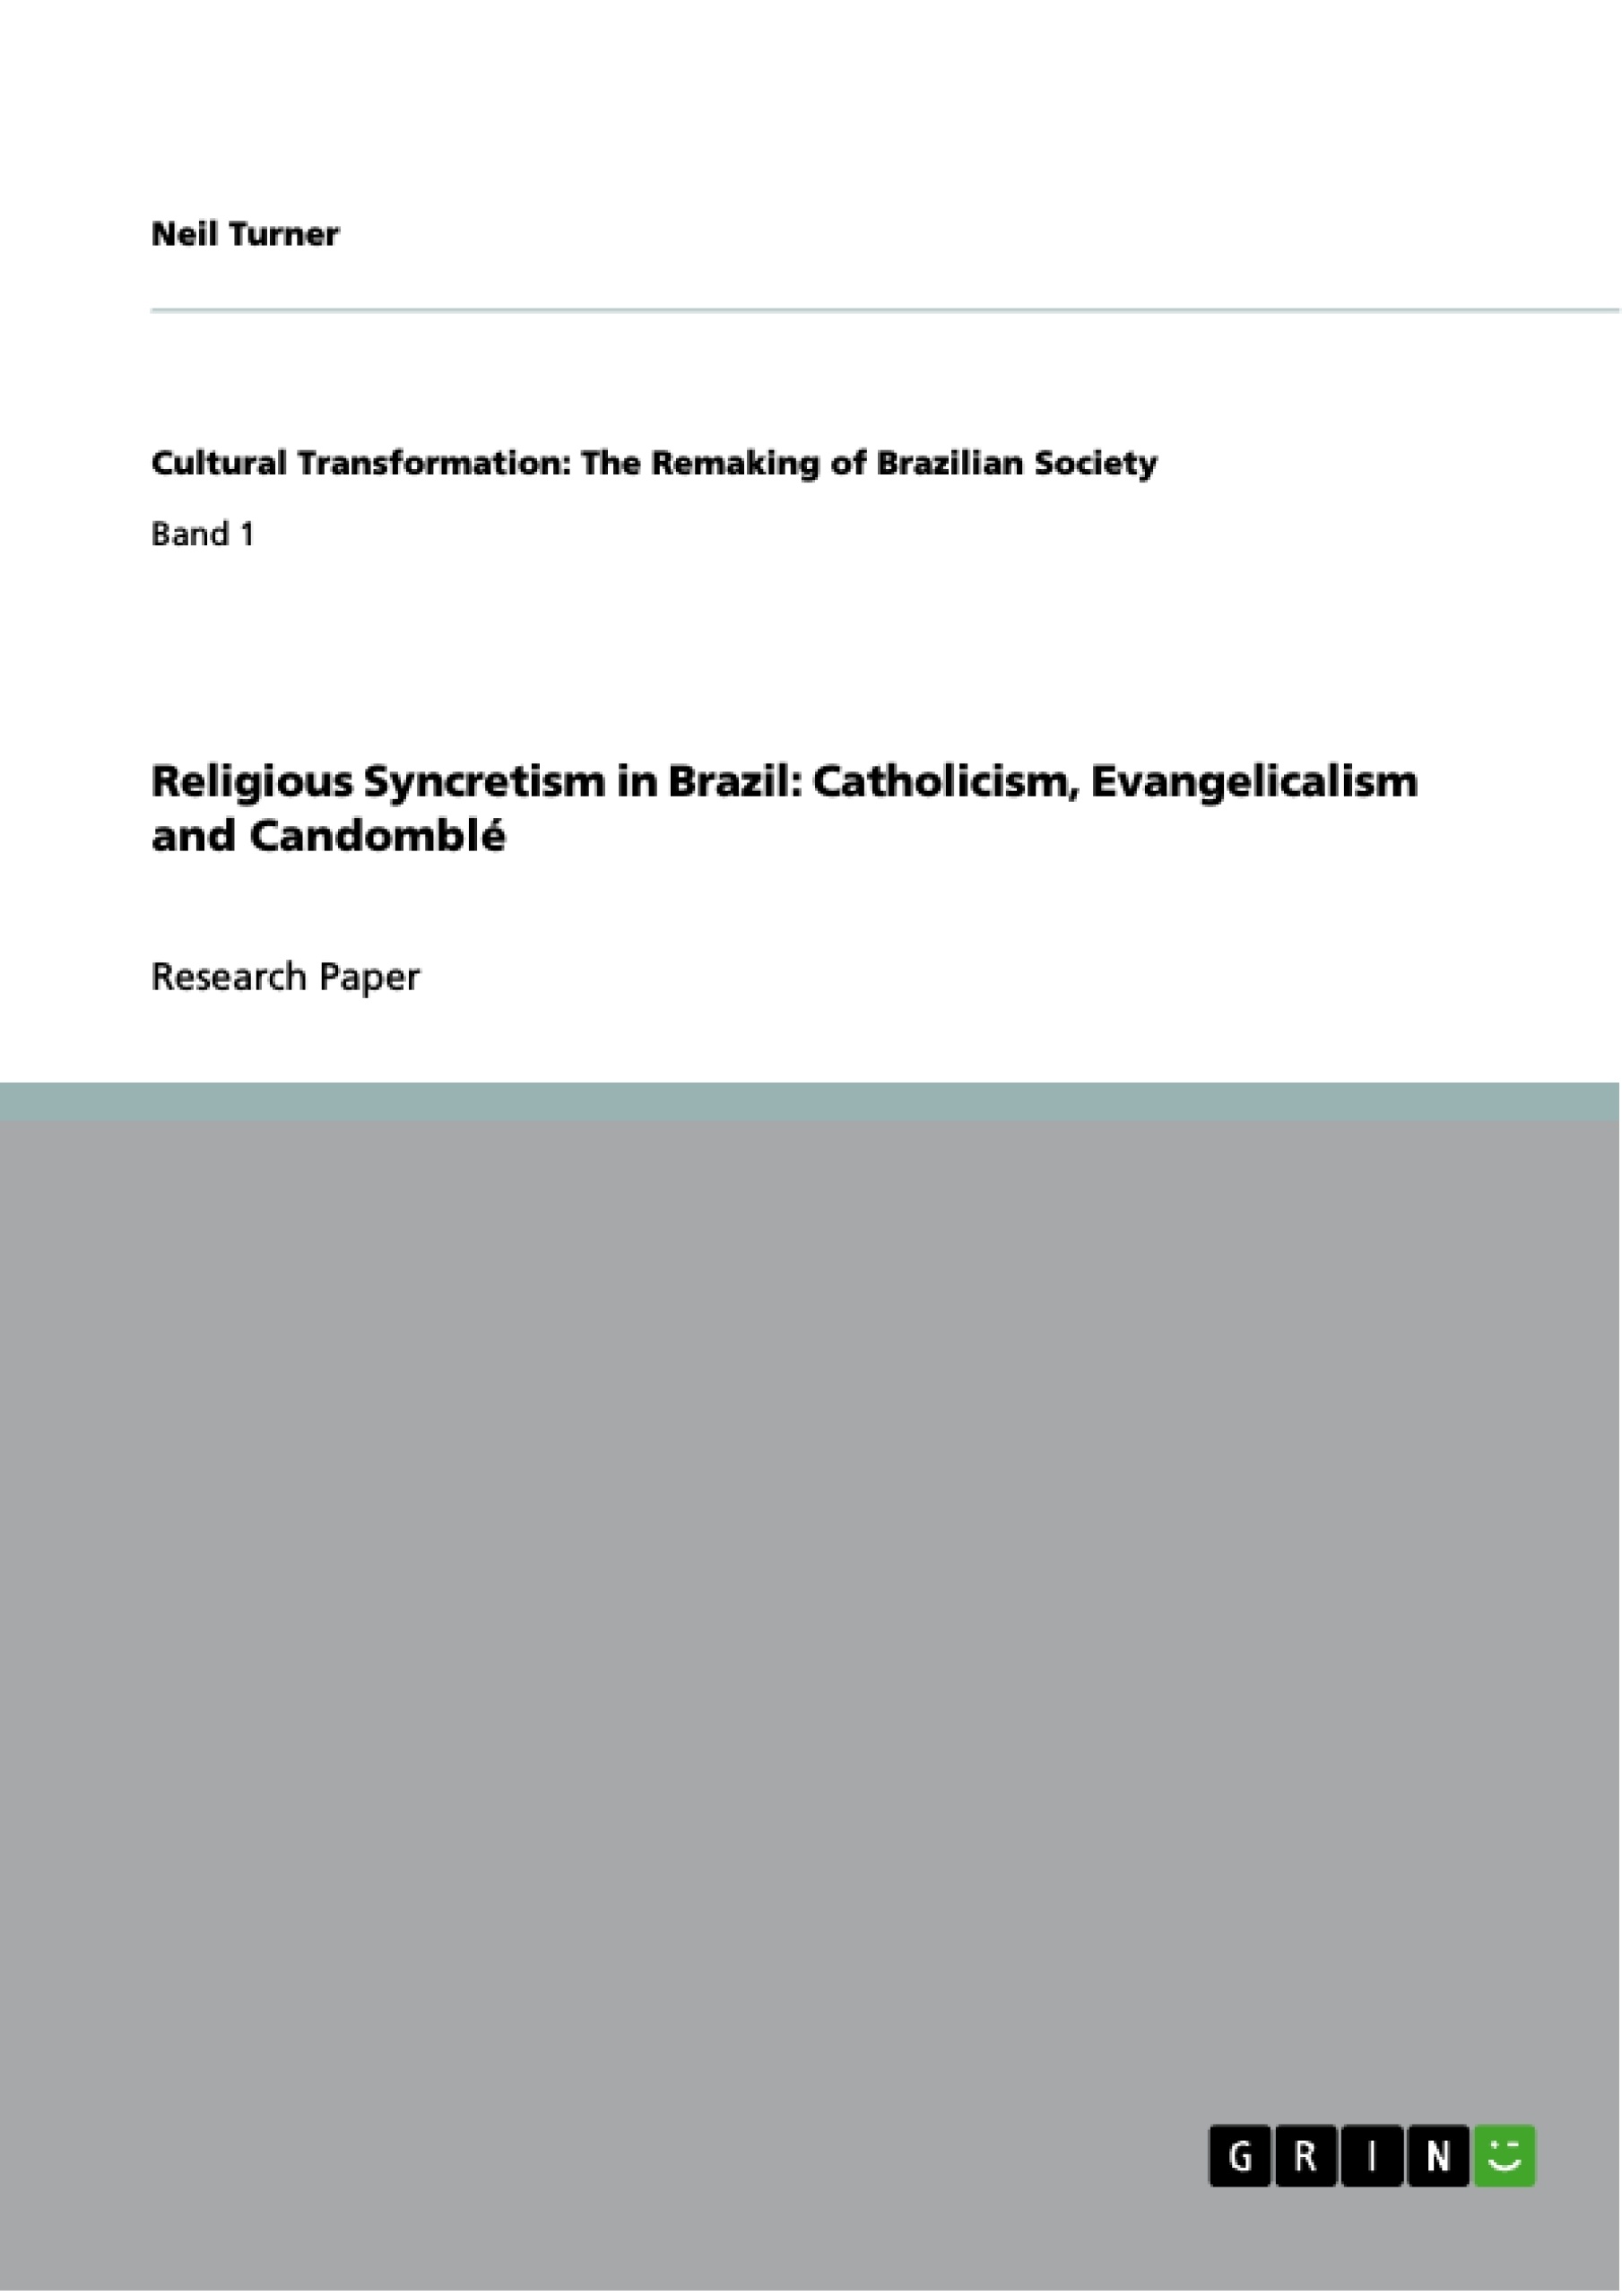 Título: Religious Syncretism in Brazil: Catholicism, Evangelicalism and Candomblé